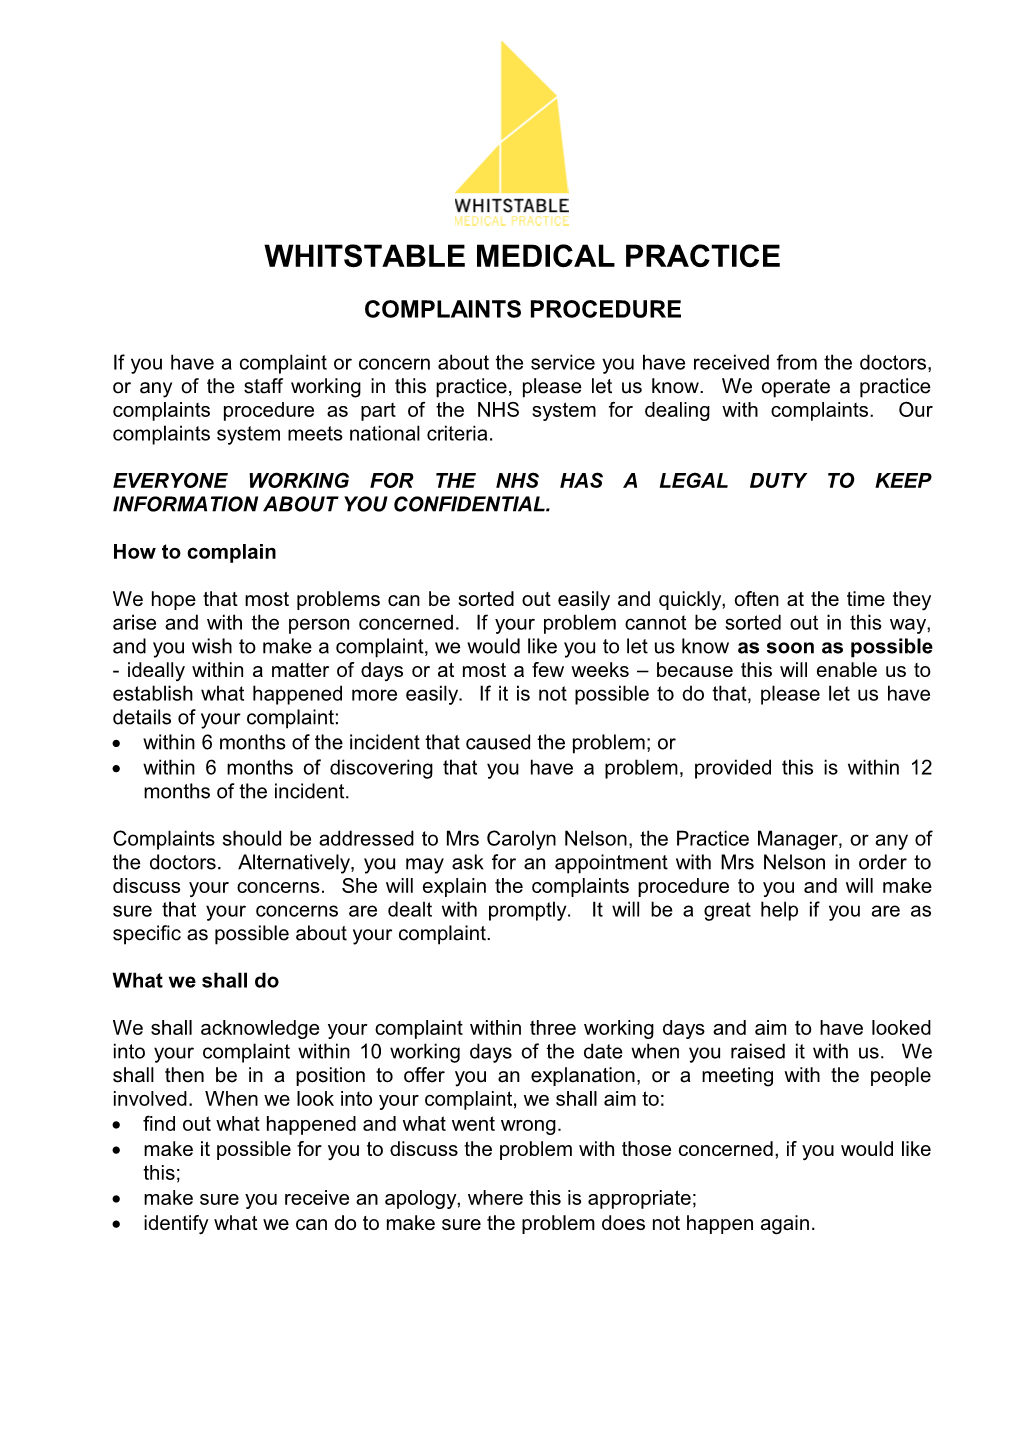 Whitstable Medical Practice